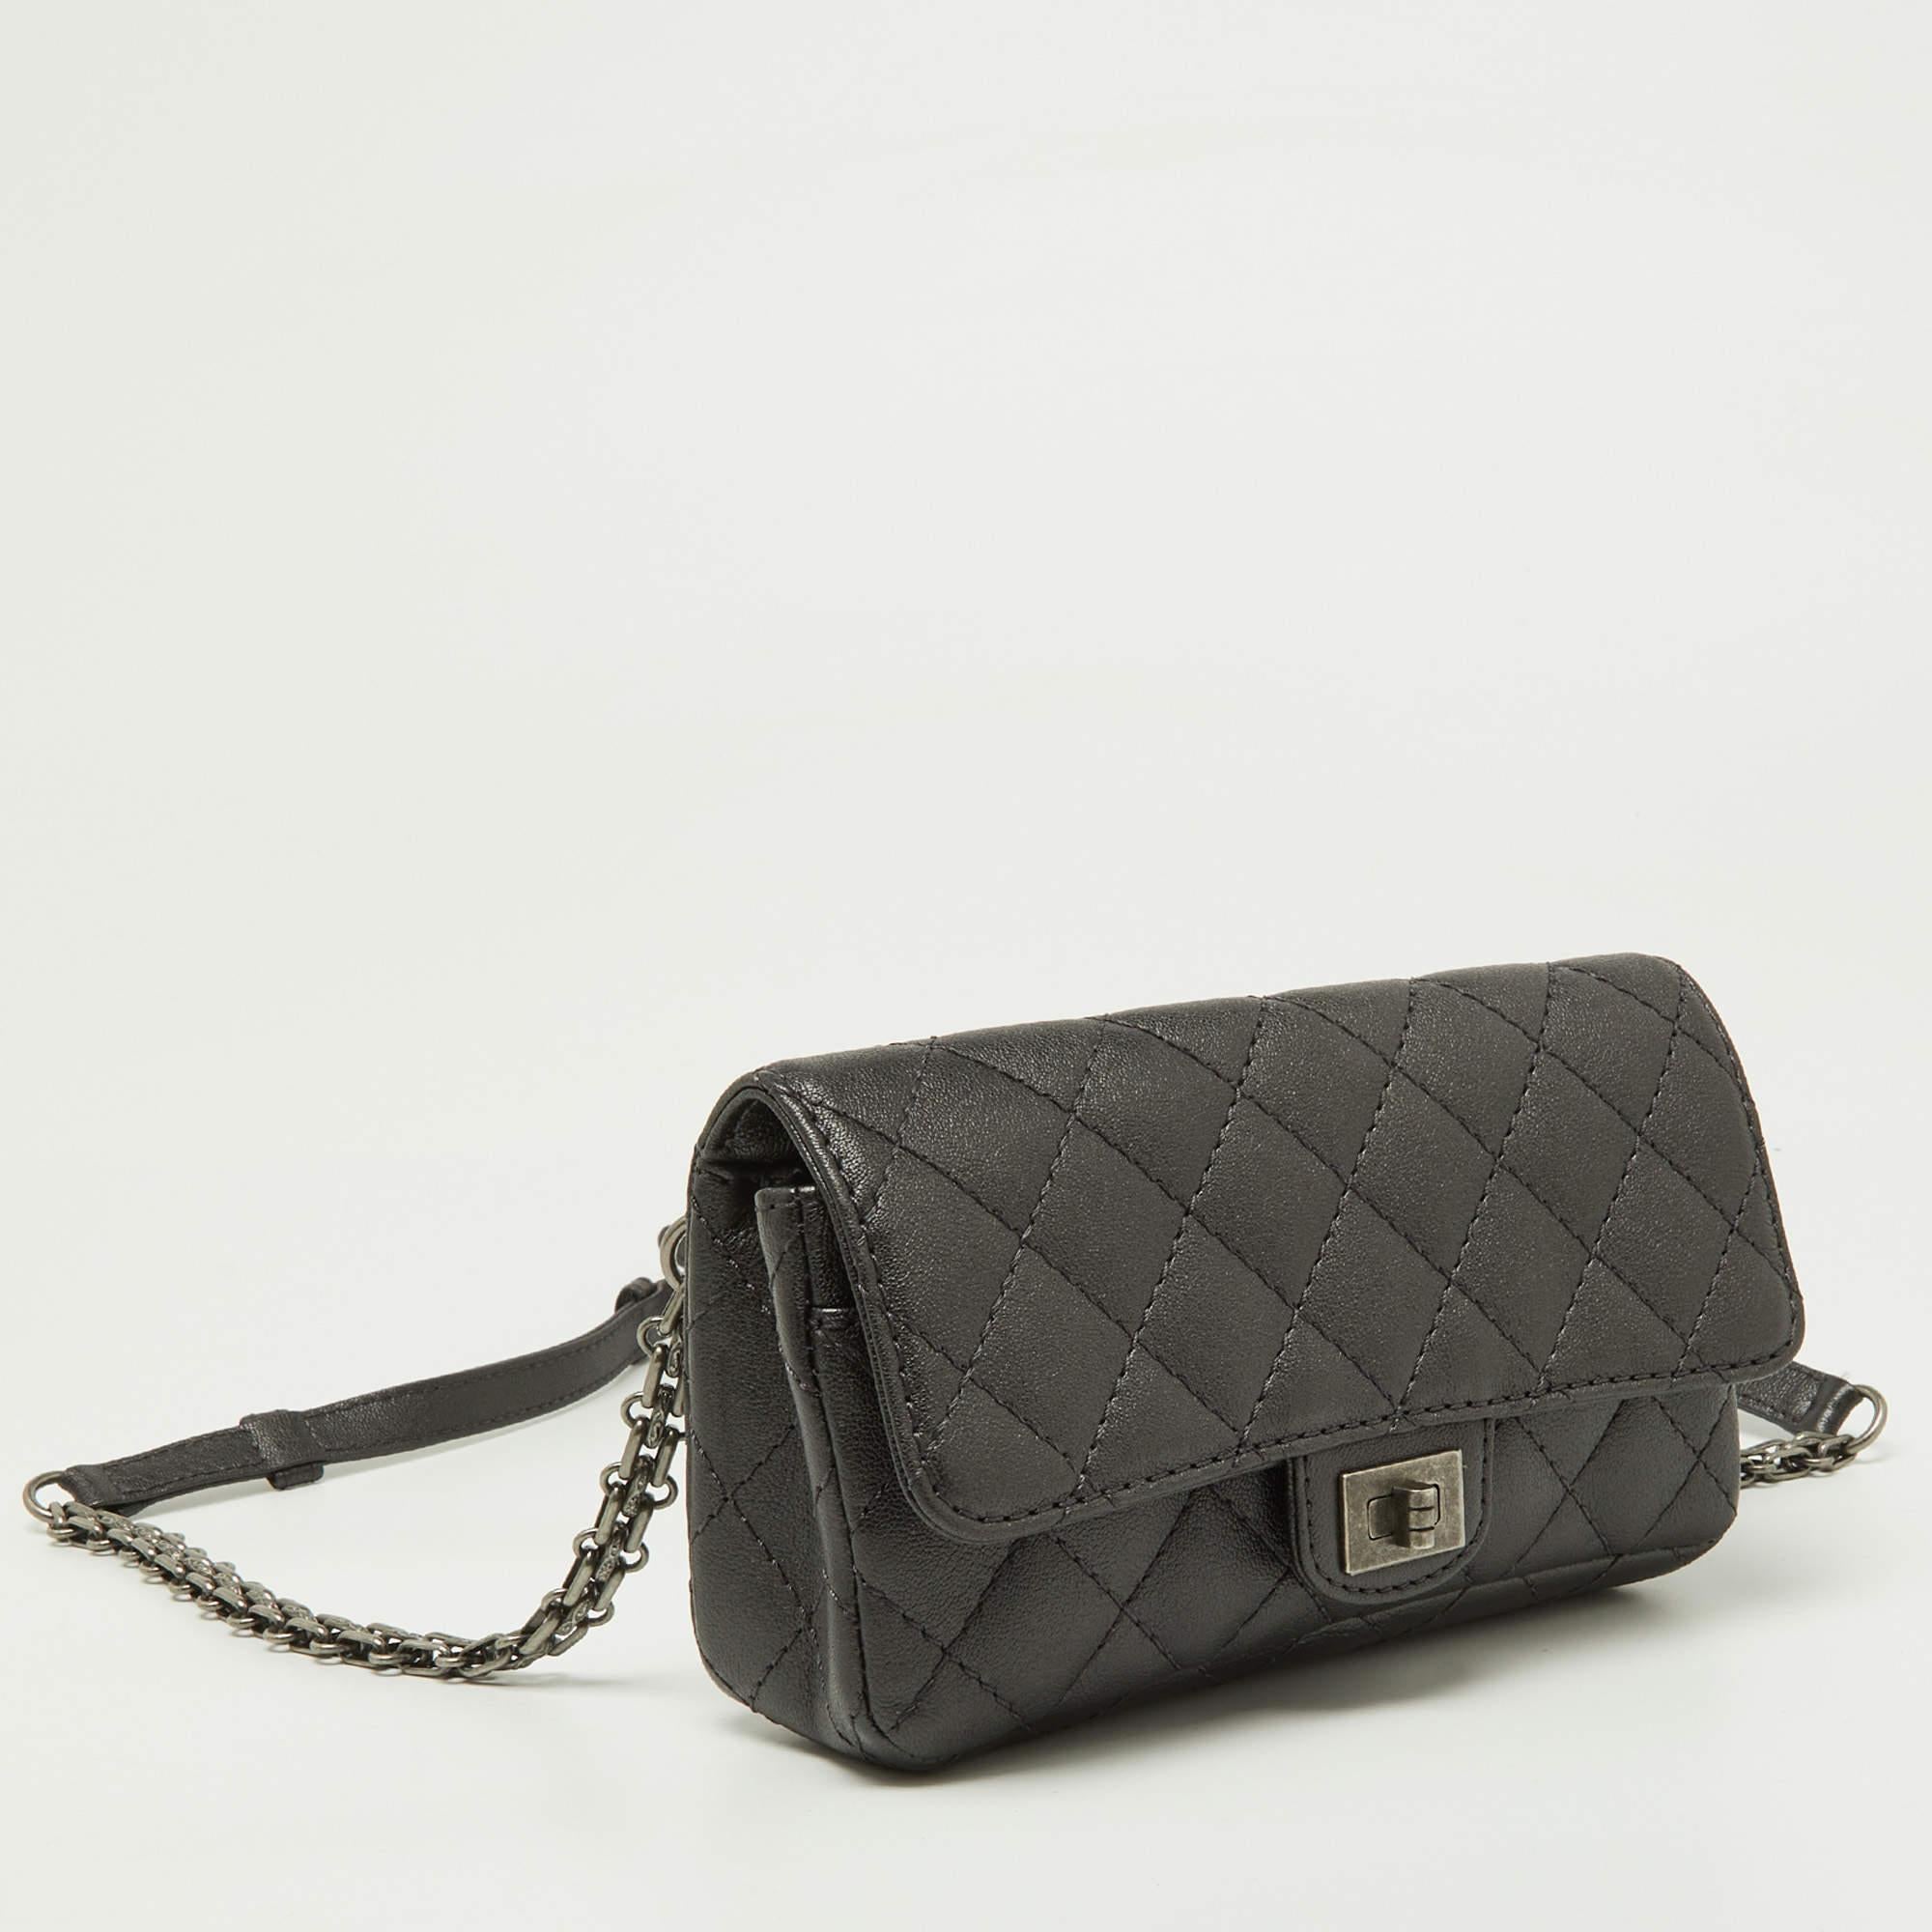 Women's Chanel Grey Quilted Leather Reissue 2.55 Waist Belt Bag For Sale